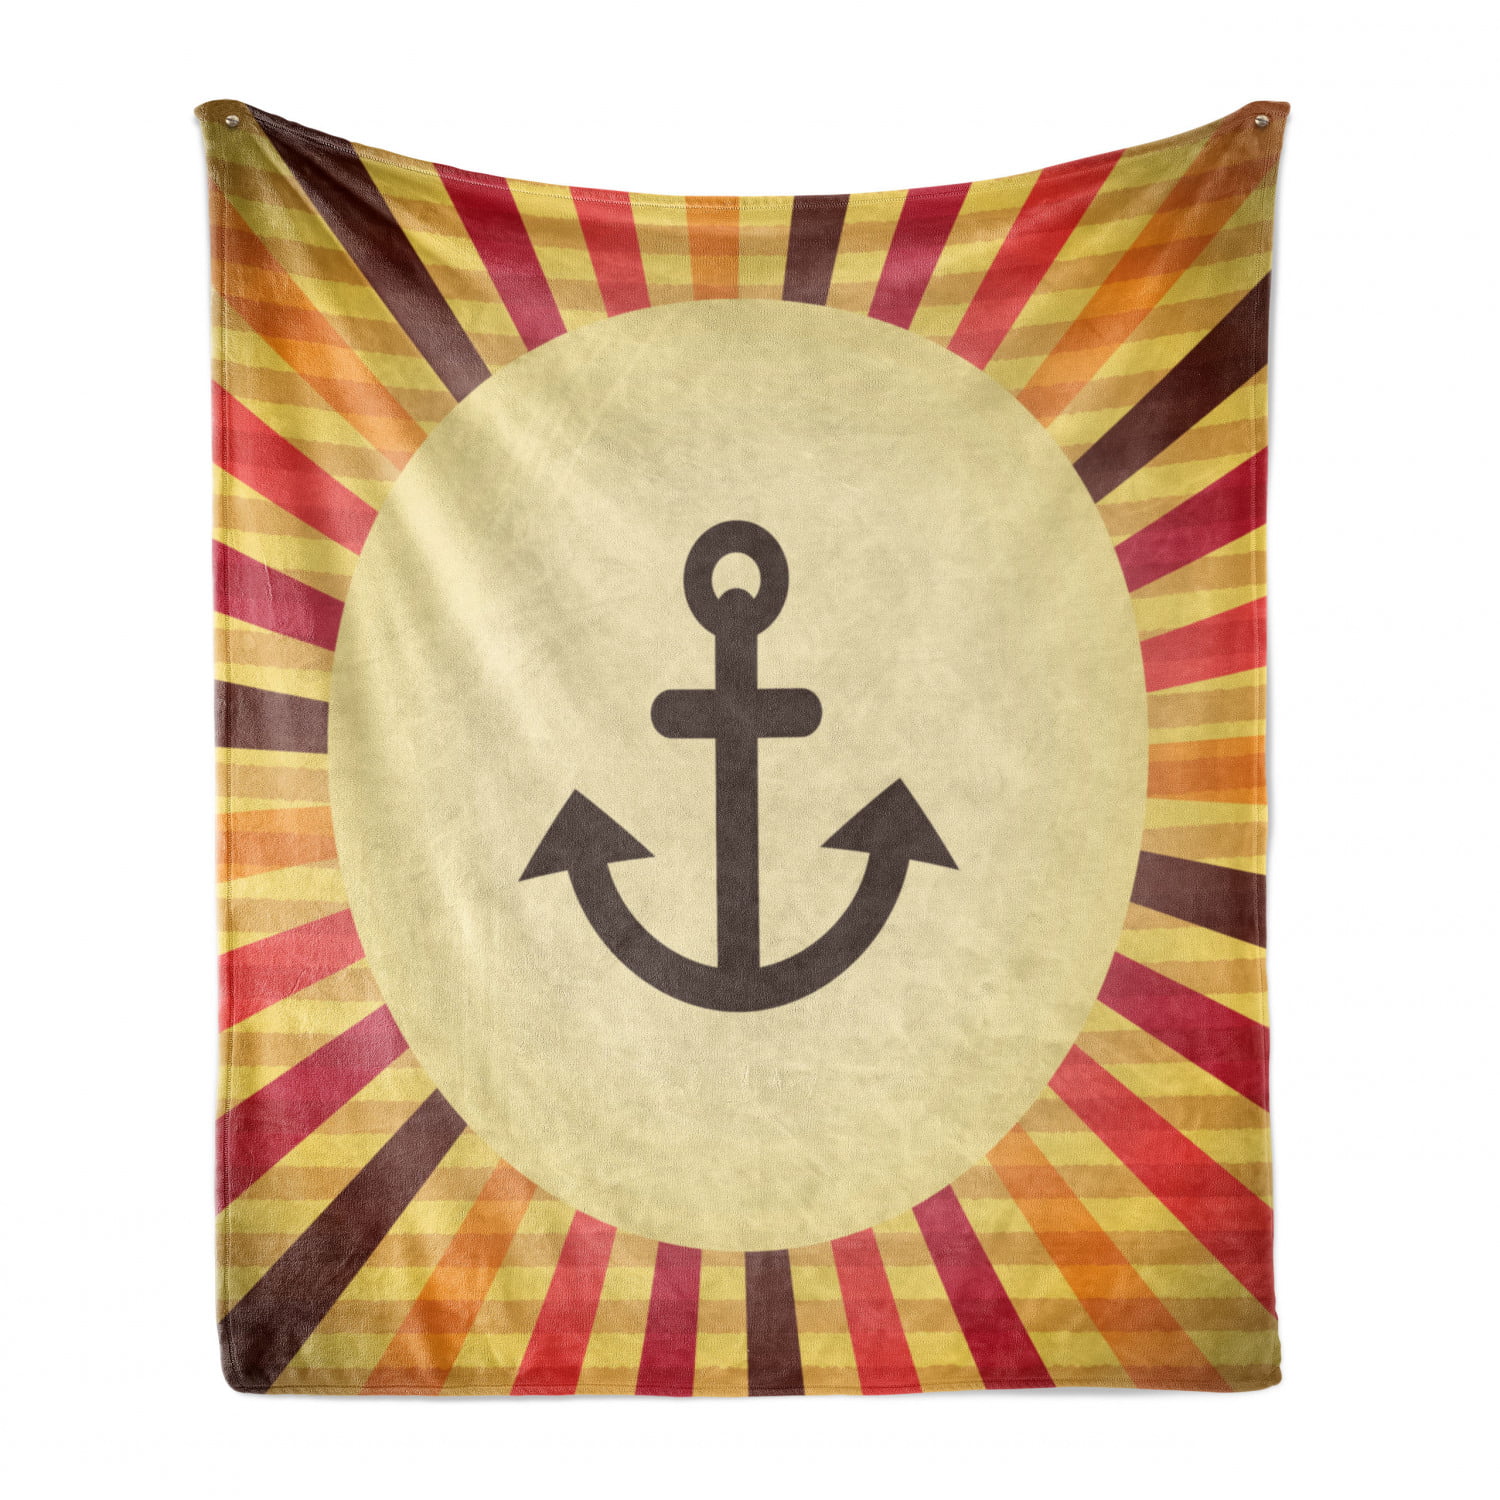 Vintage Pop Art Sailing Anchor on Colorful Background Security Safety Cozy Plush for Indoor and Outdoor Use Ambesonne Anchor Soft Flannel Fleece Throw Blanket 60 x 80 Cream Red Orange 